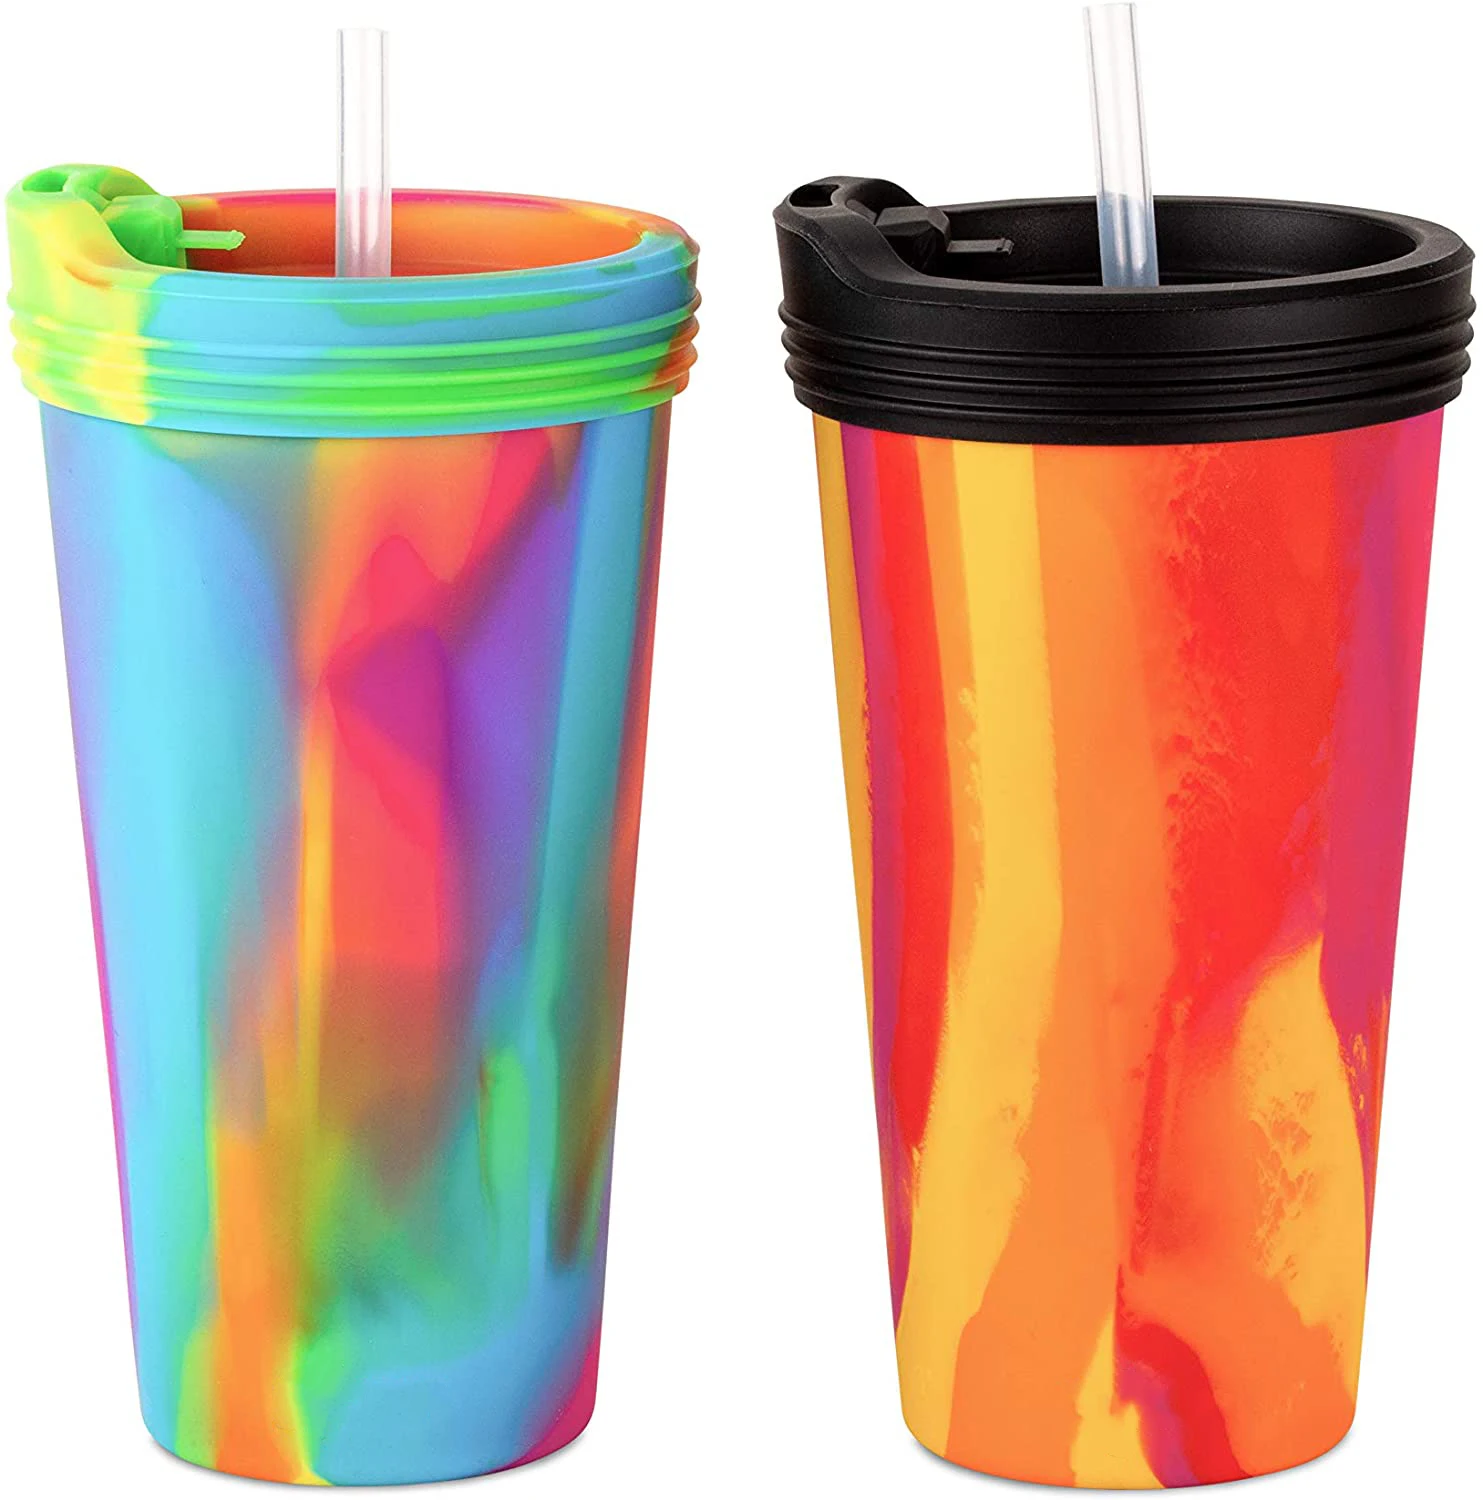 

2021BPA free New Arrivals 500ml Food Grade Silicone Reusable Beer Drinking Cup with Silicone lid and Silicone Straw for Travel, Customized color